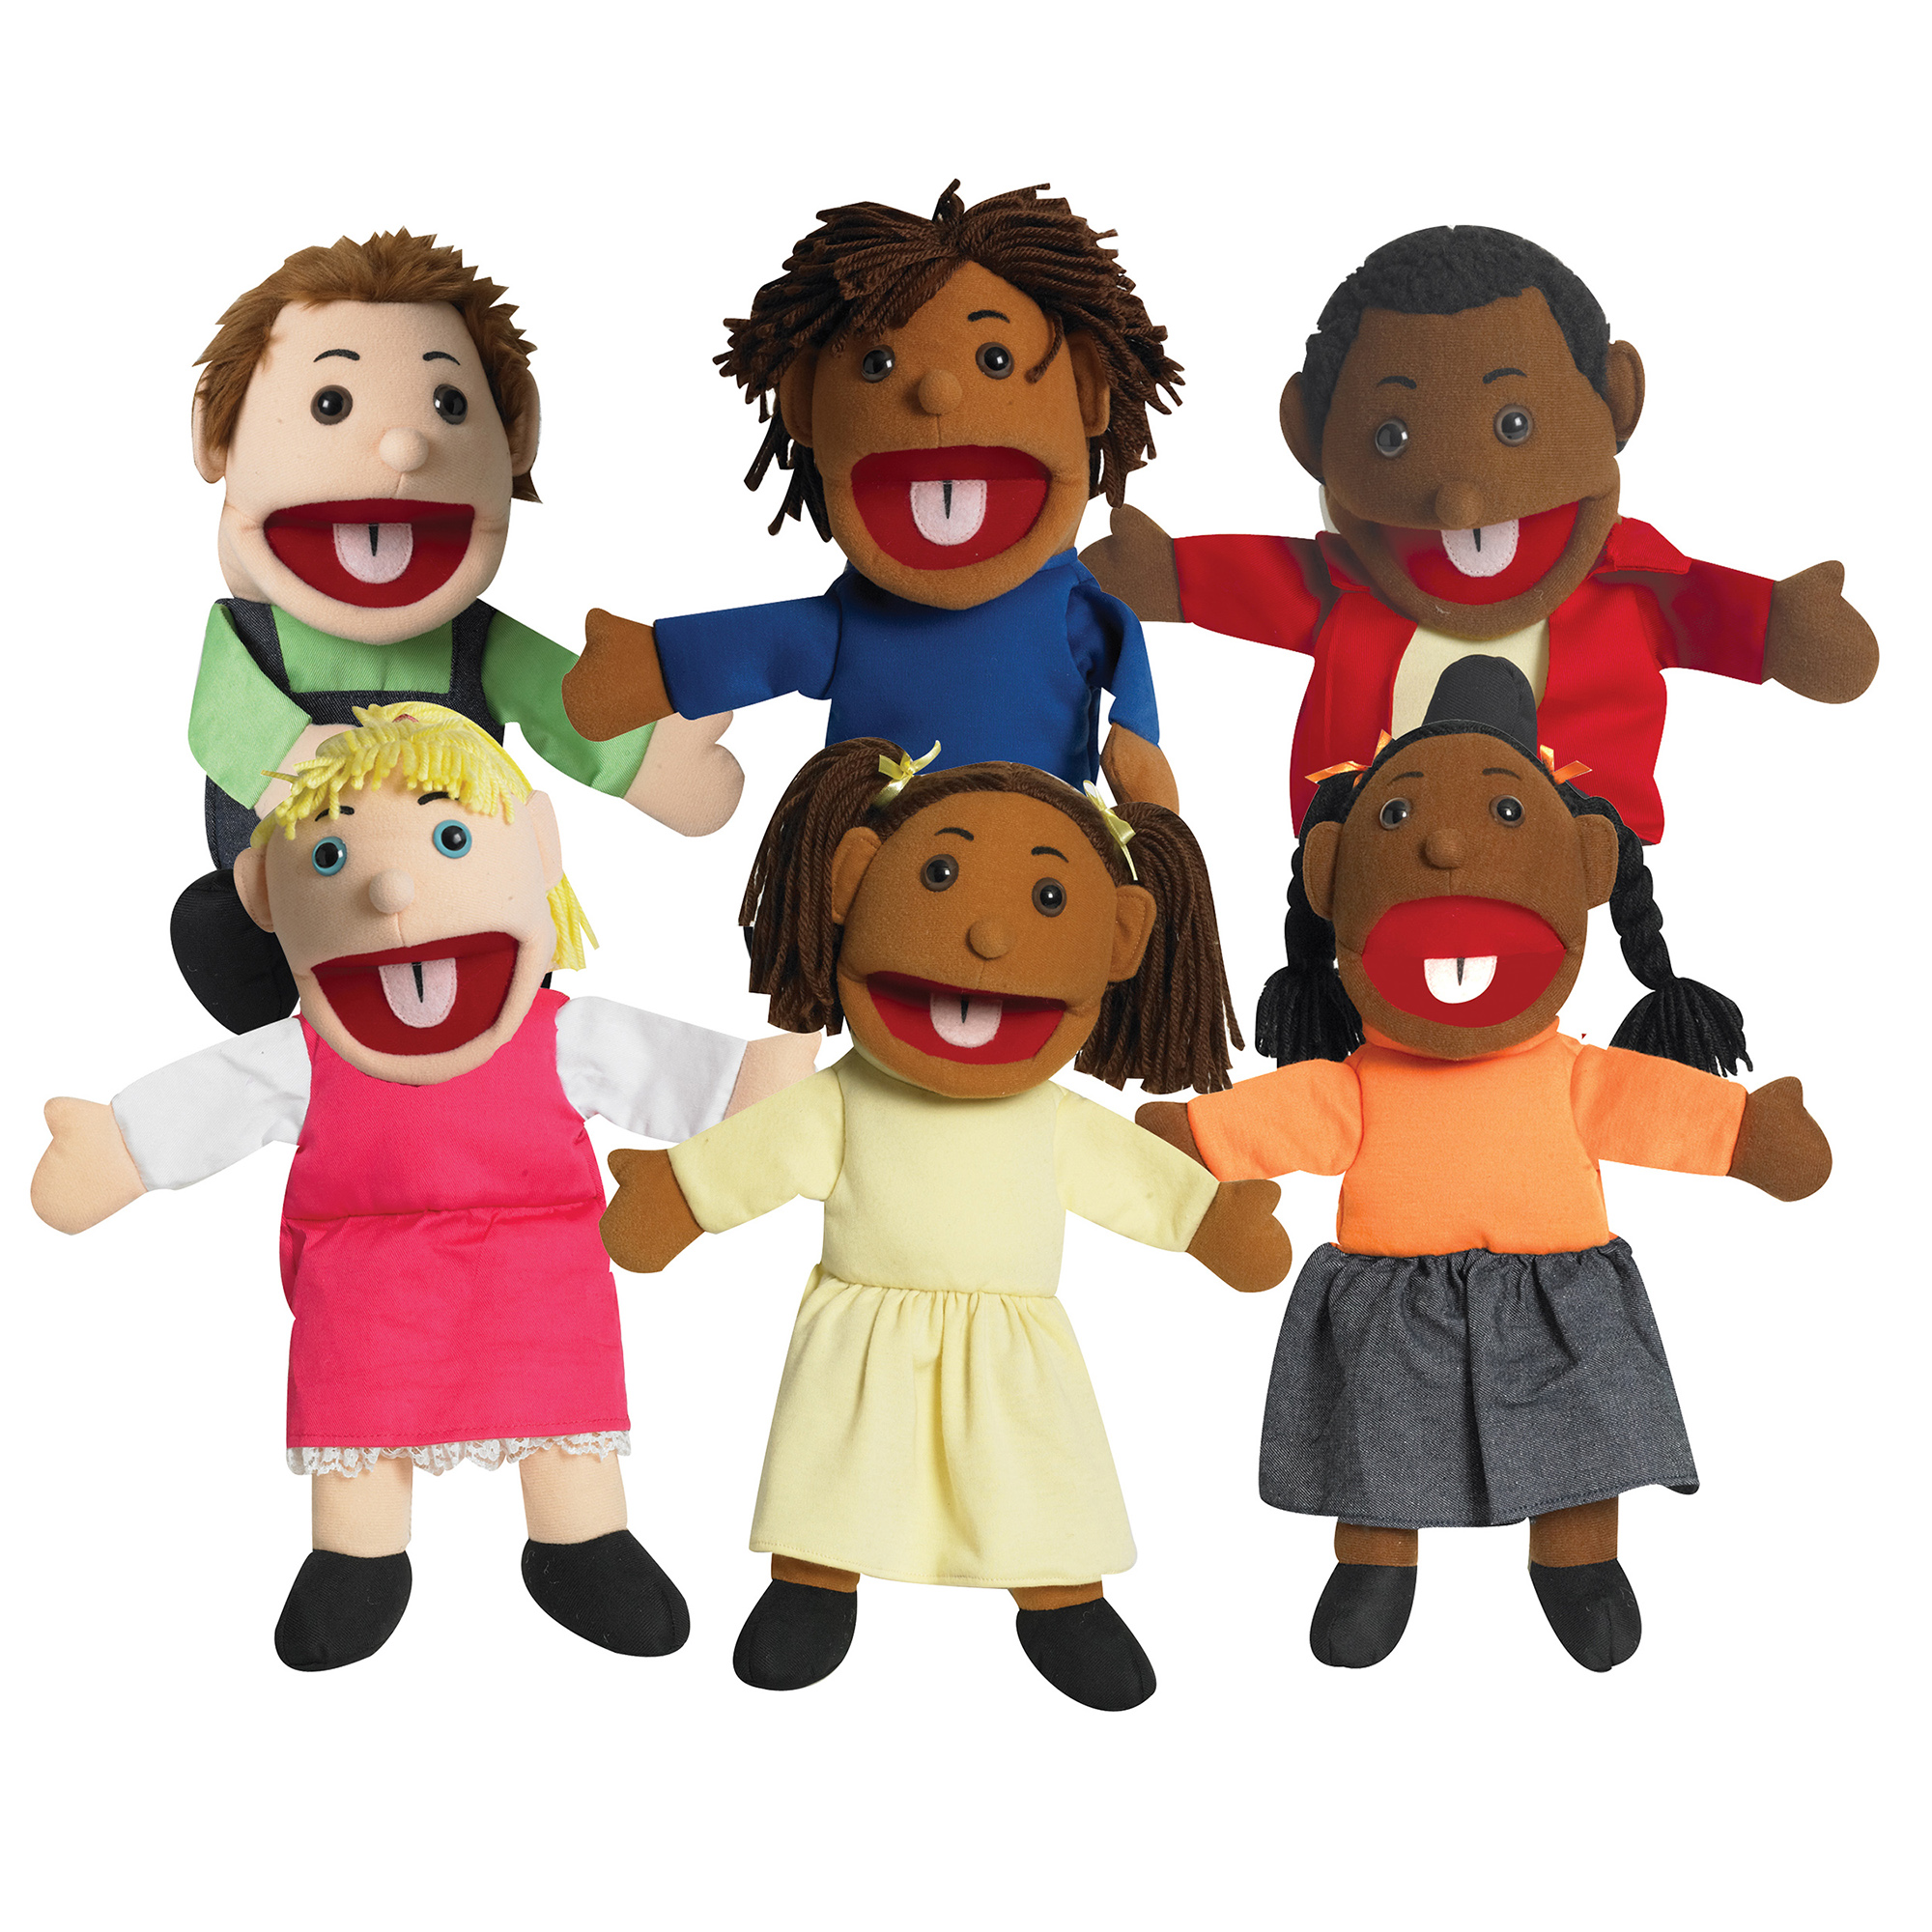 38 cm  Ethnic Children Puppets with Movable Mouths - Set of 6